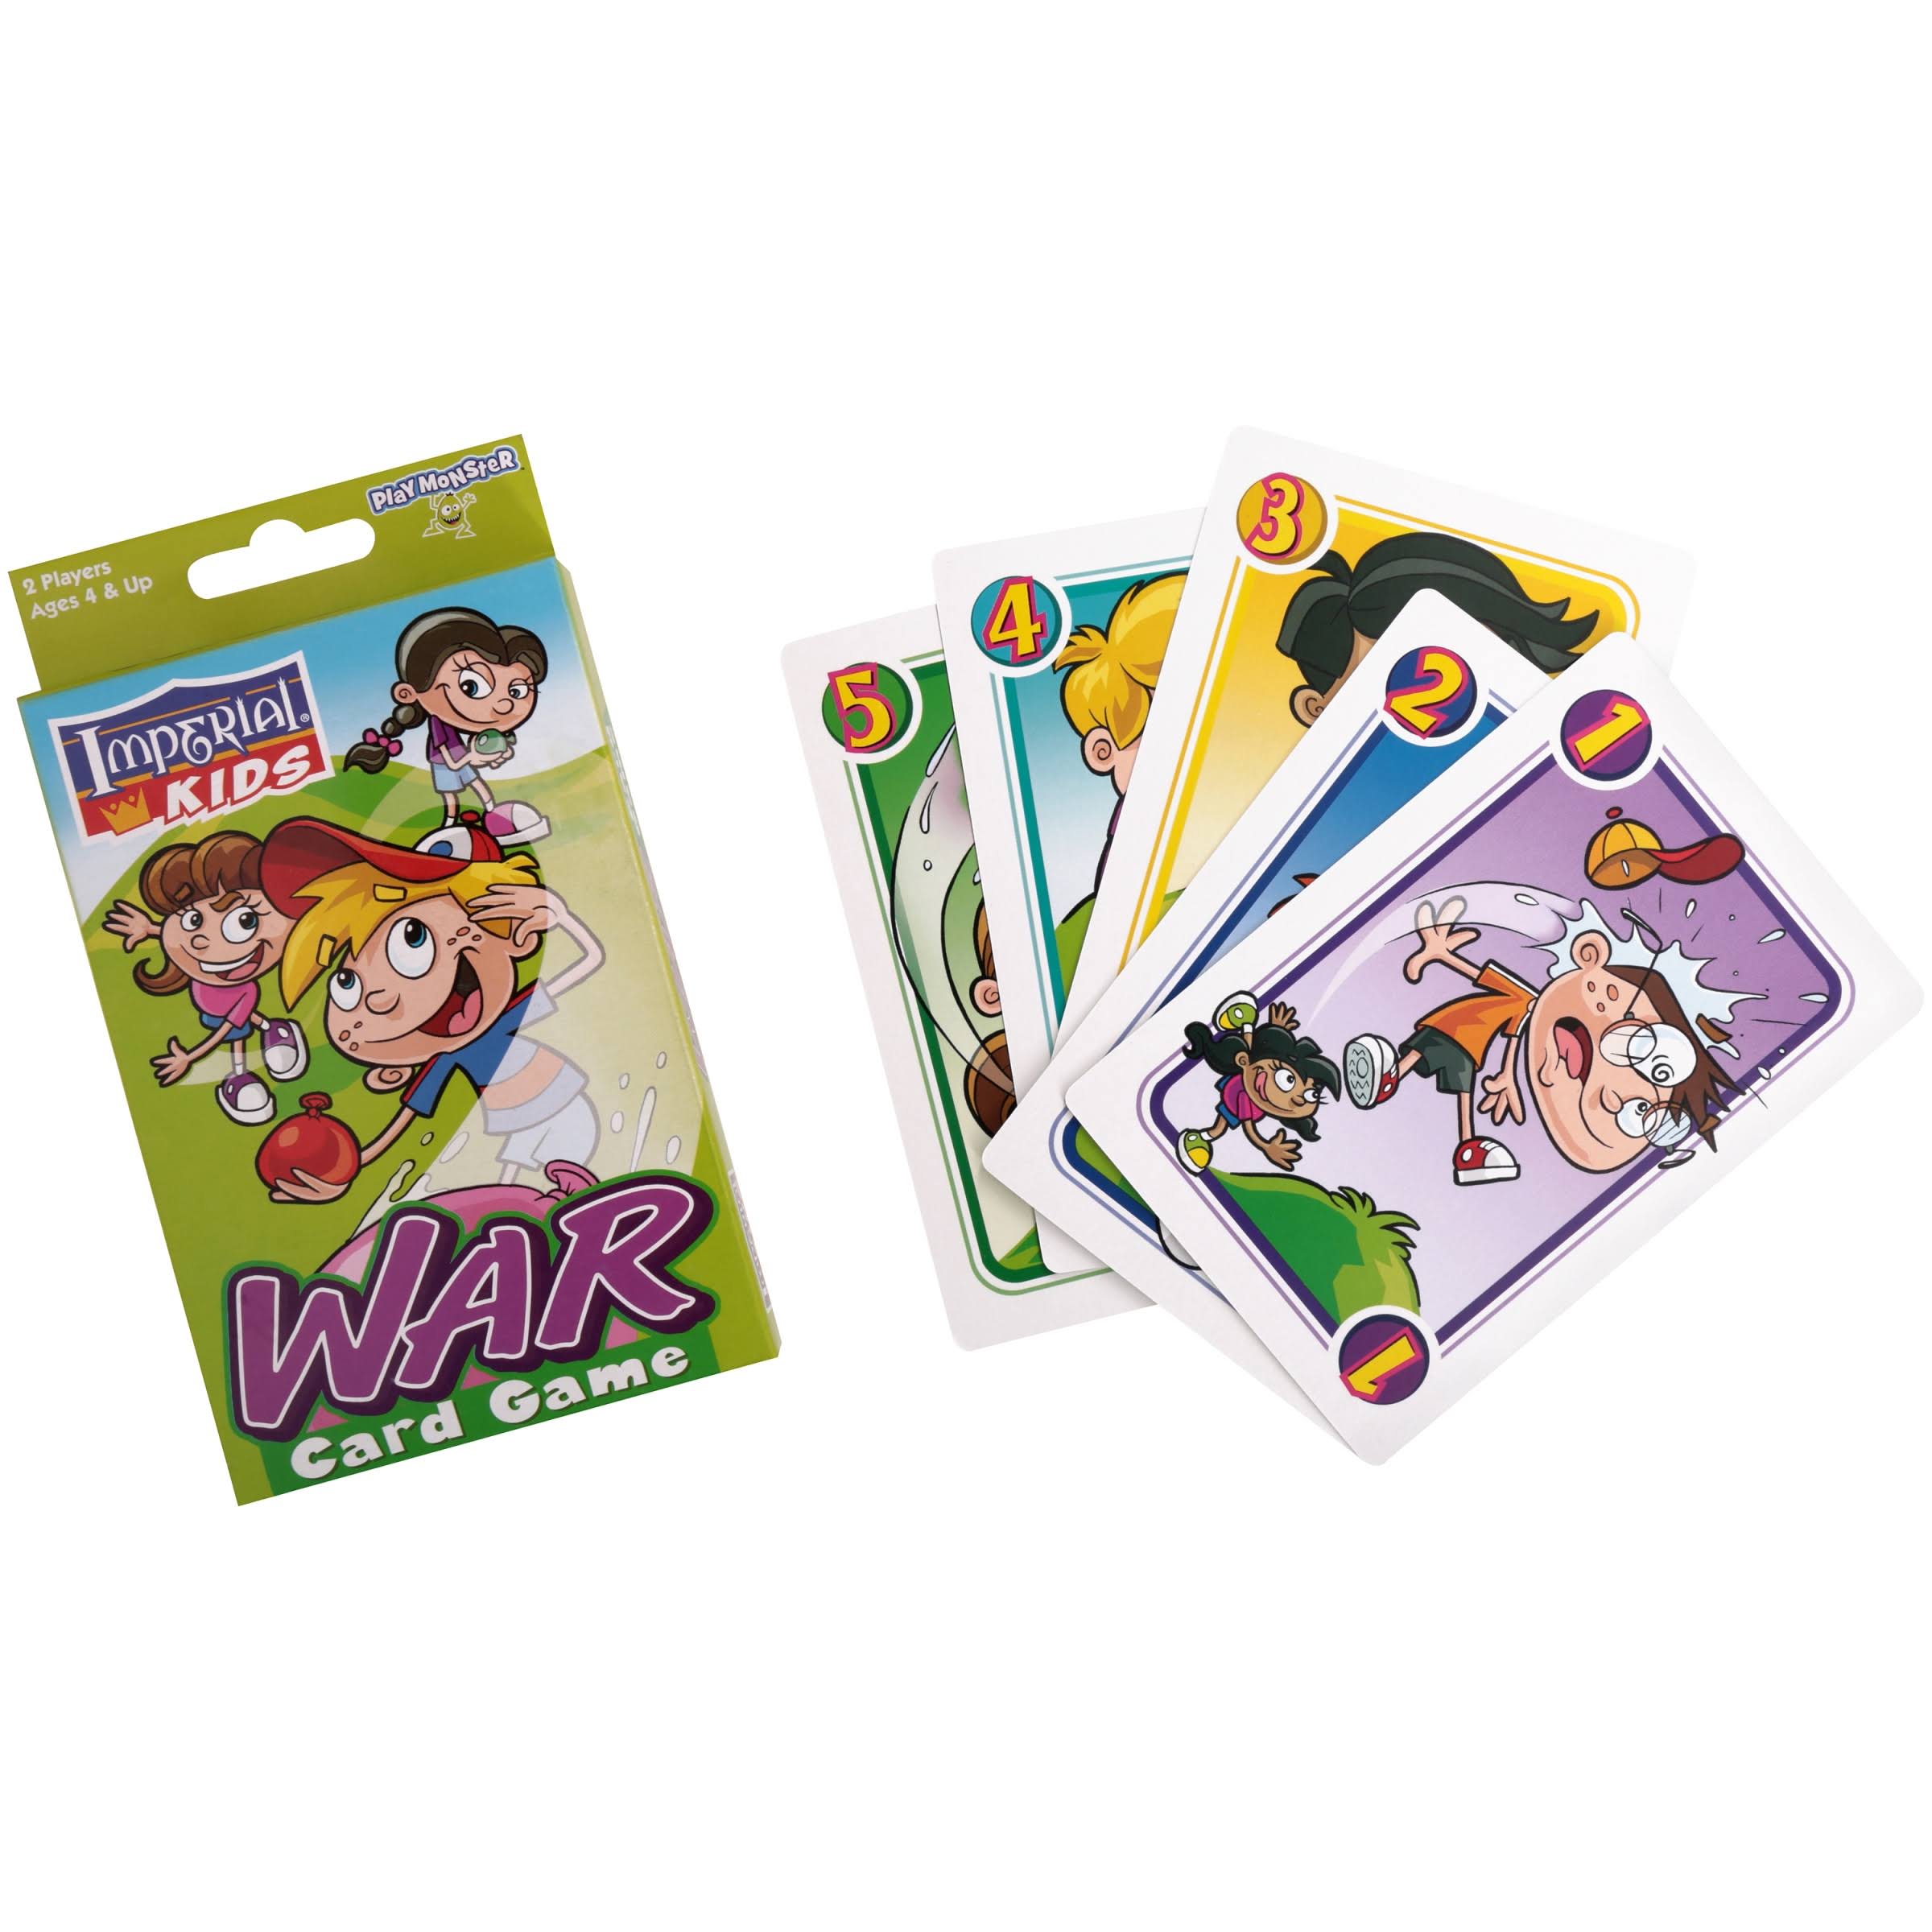 Patch Imperial Kids War Card Game